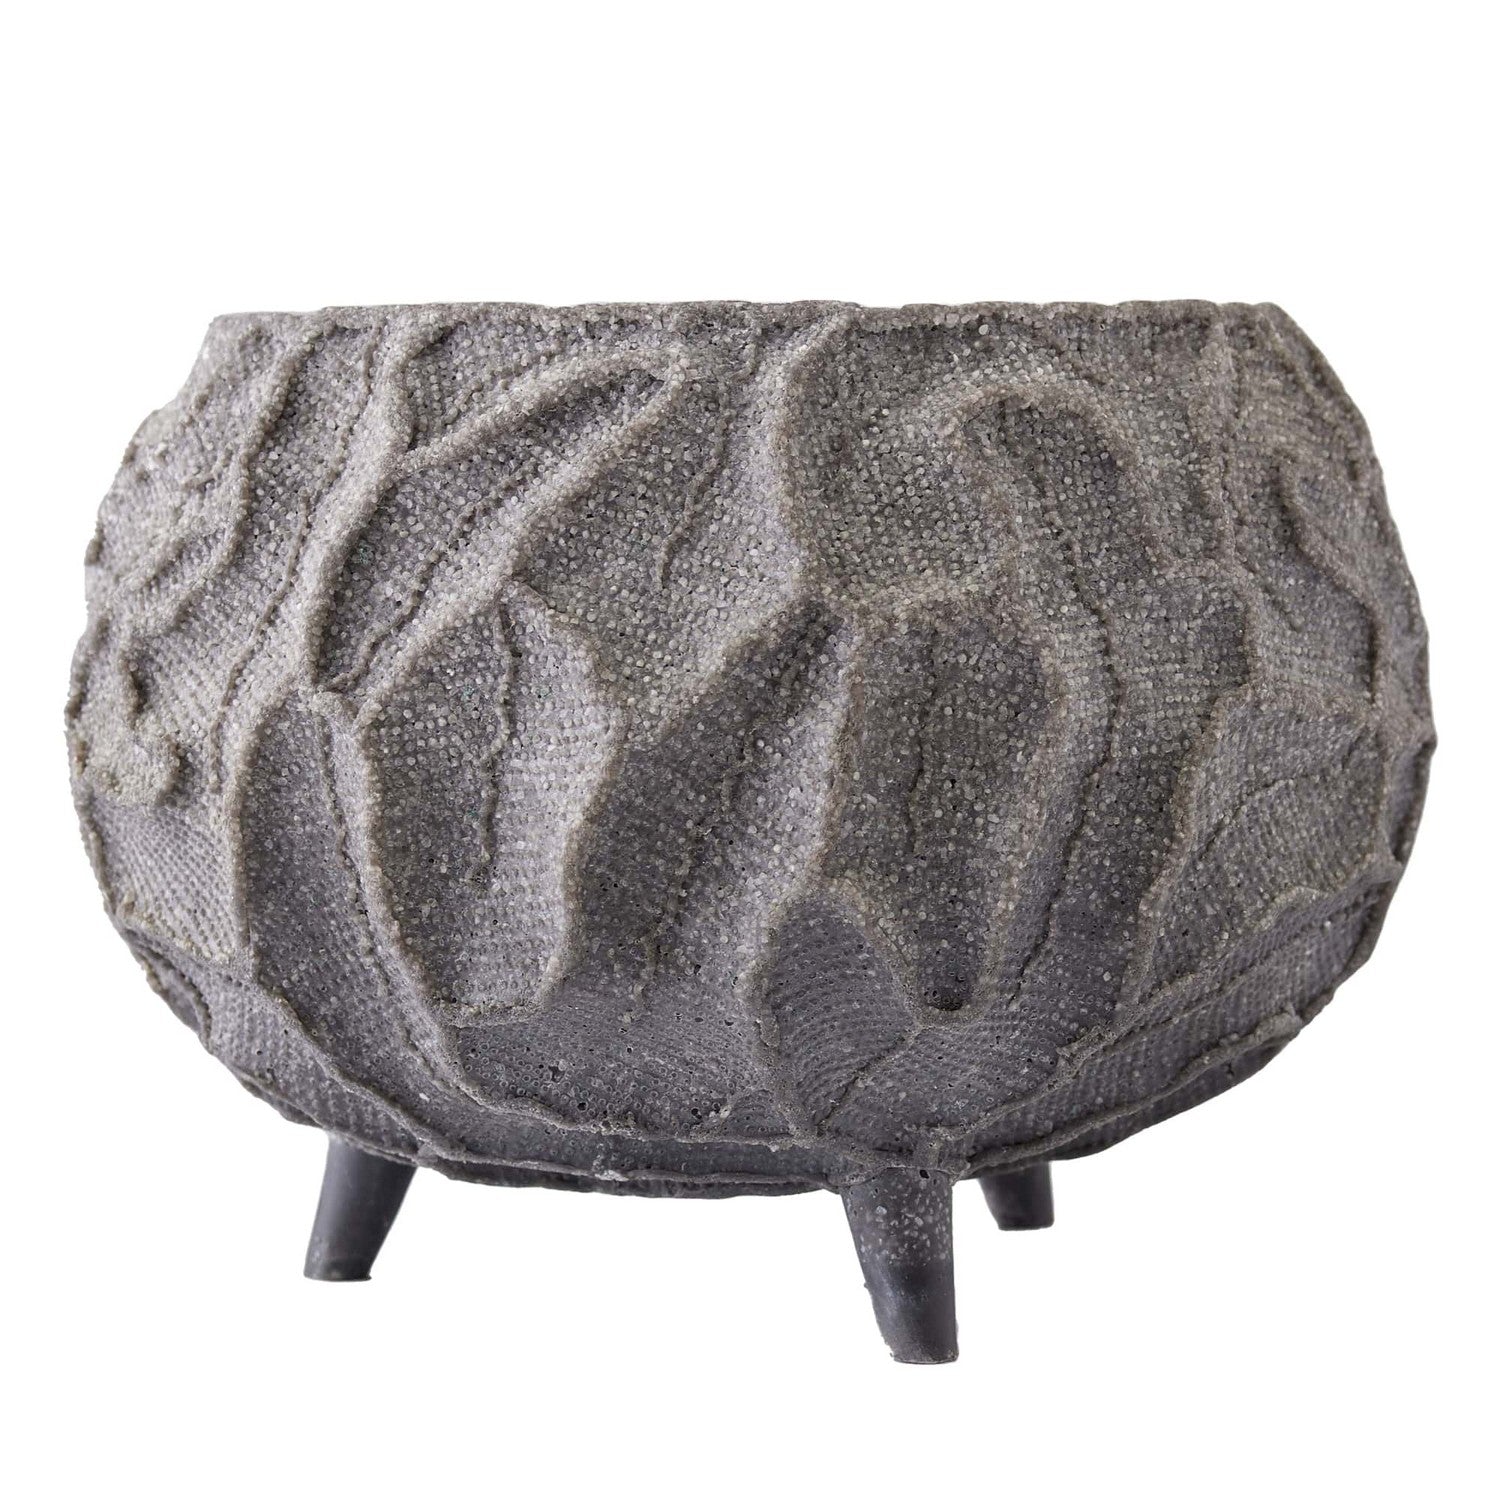 Planter from the Hyder collection in Graphite finish